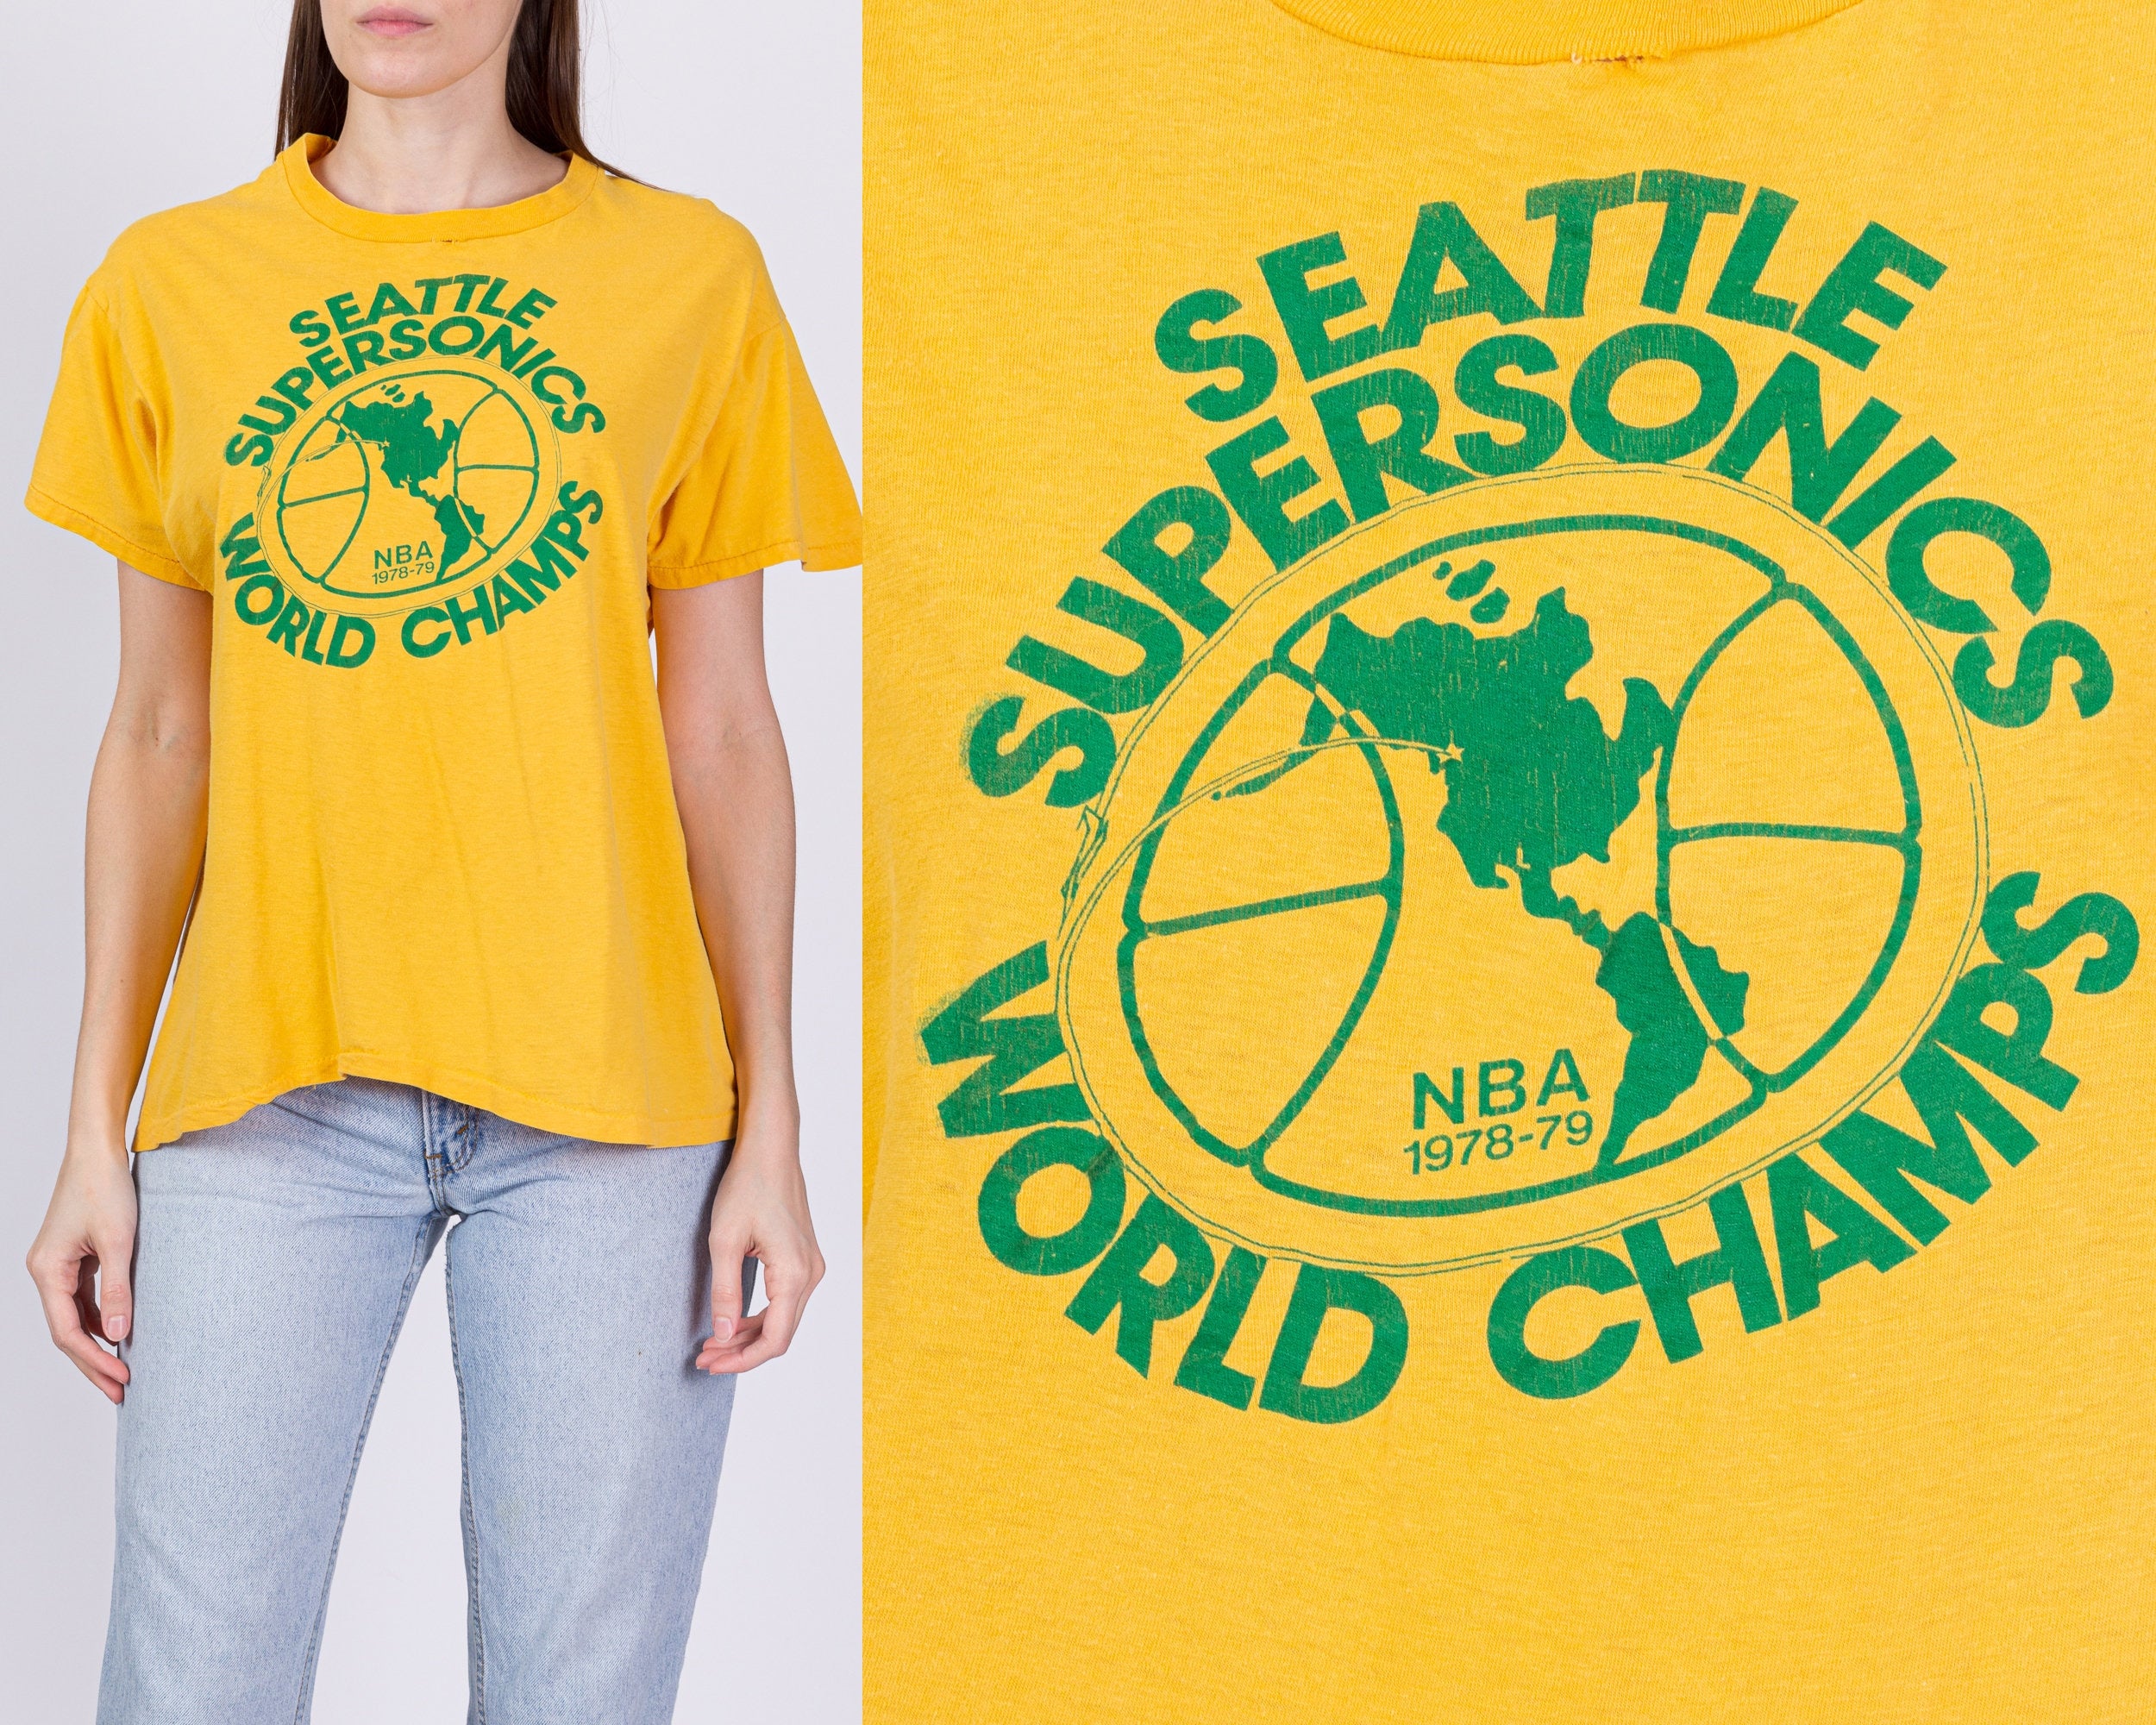 Collectible Seattle Supersonics T-shirt Old New Stock